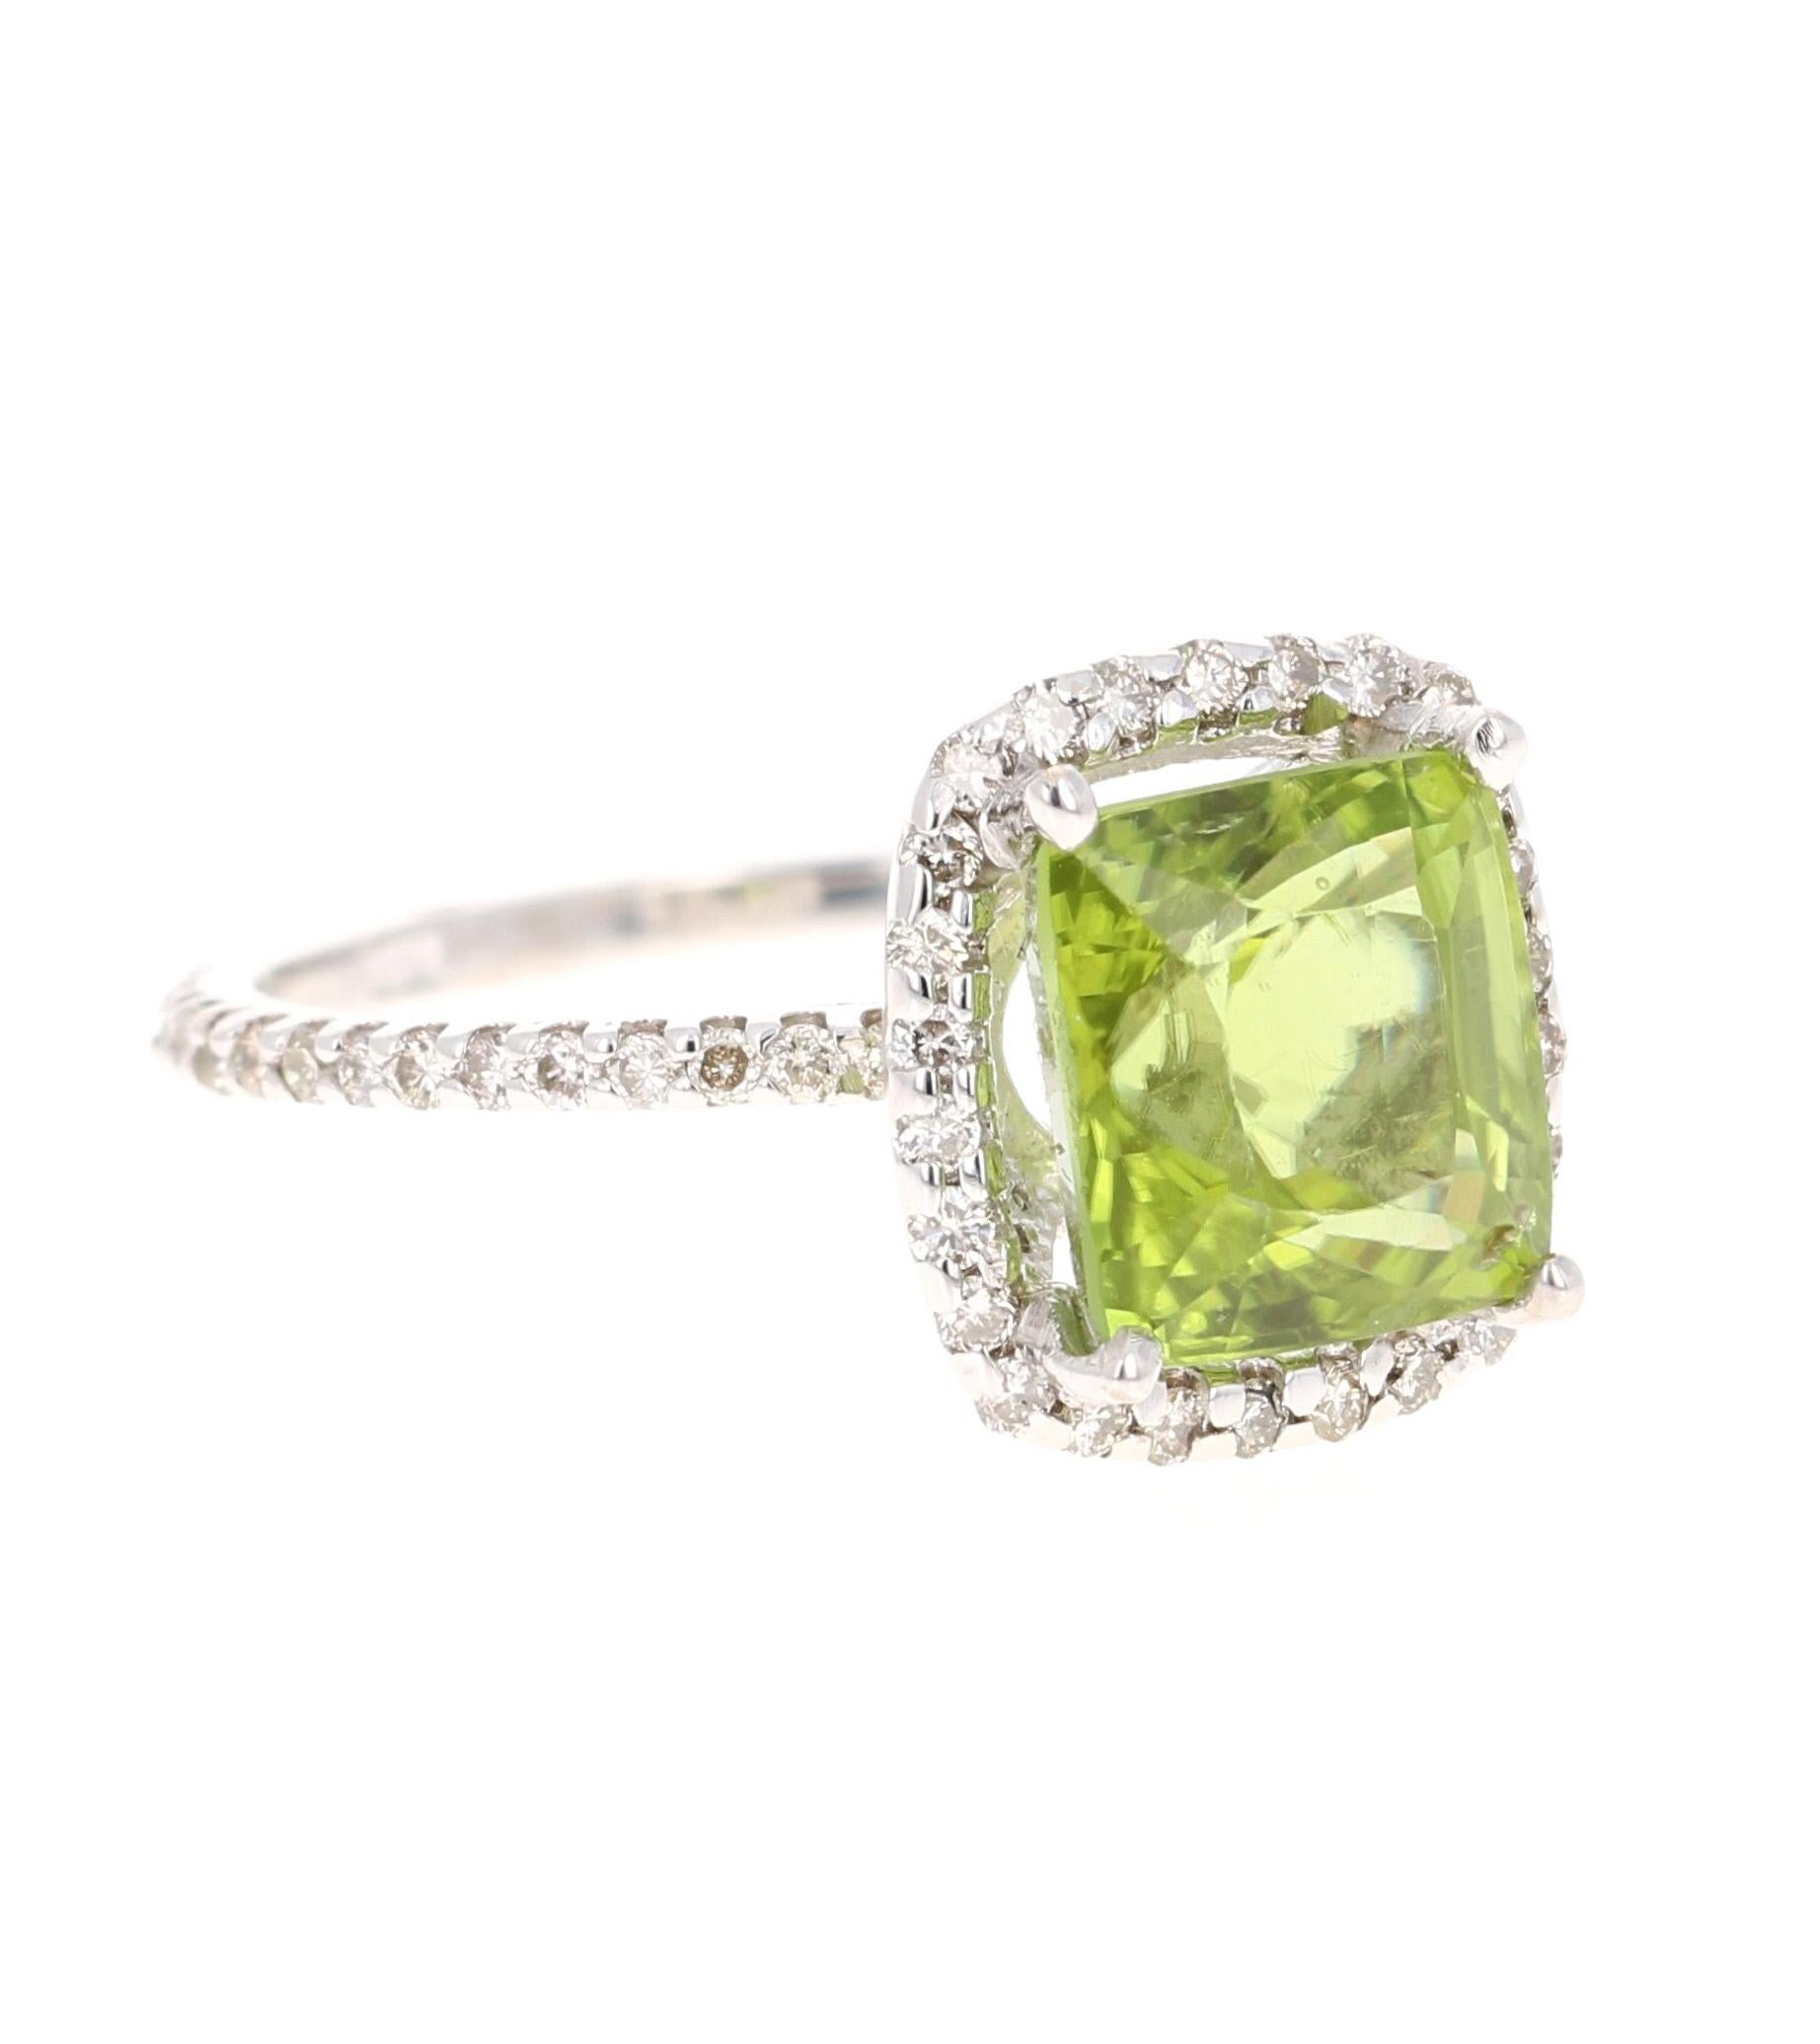 Peridot Diamond White Gold Engagement Ring
Bright, Beautiful and Bling! 

This ring has a 4.08 Carat Square-Cushion Cut Peridot and has 56 Round Cut Diamonds that weigh 0.52 Carats. The total carat weight of the ring is 4.60 Carats. 

It is set in